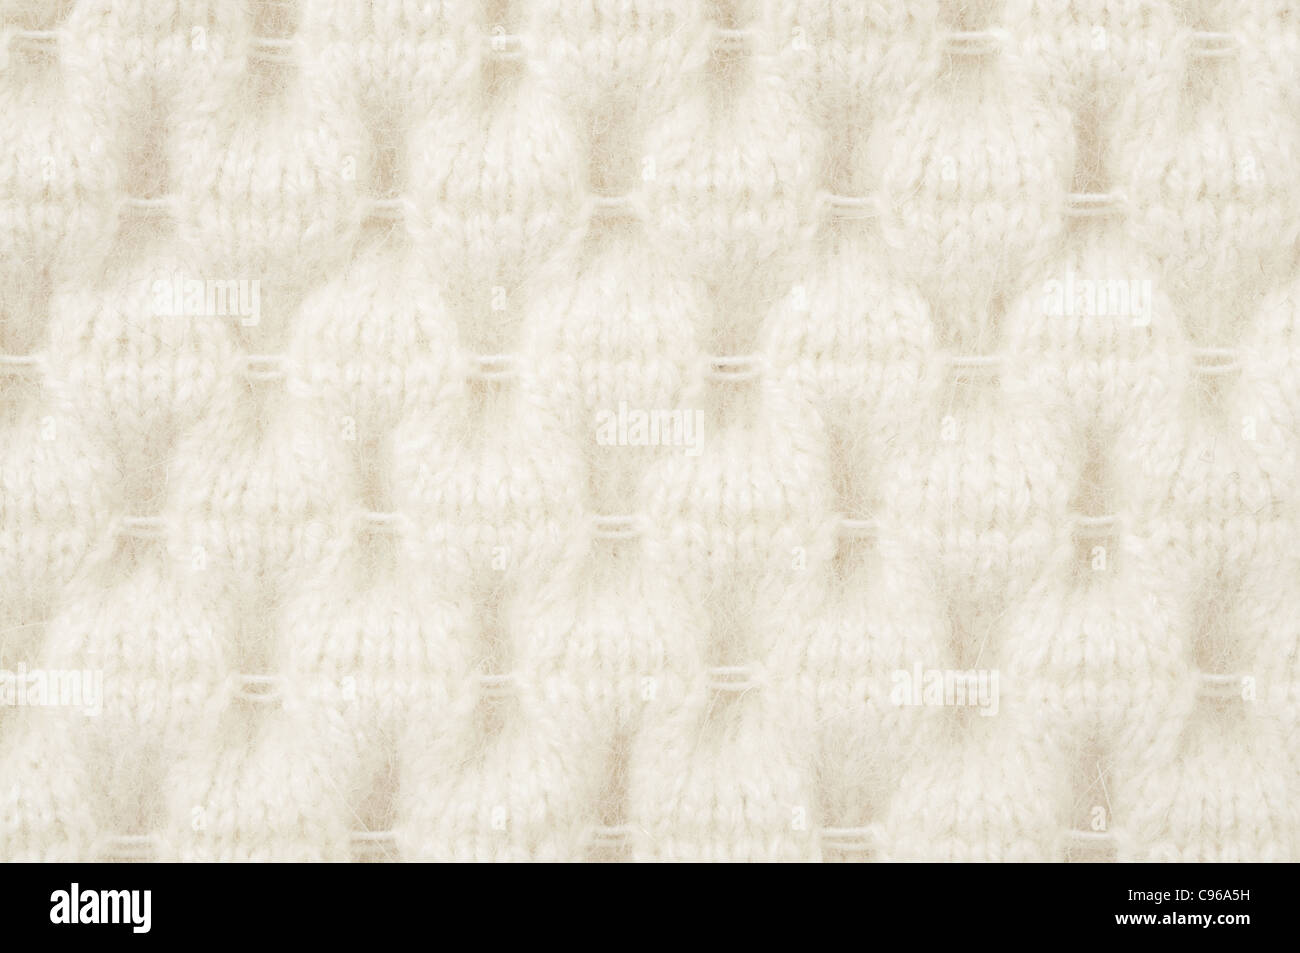 High resolution knitted detail of fabric Stock Photo